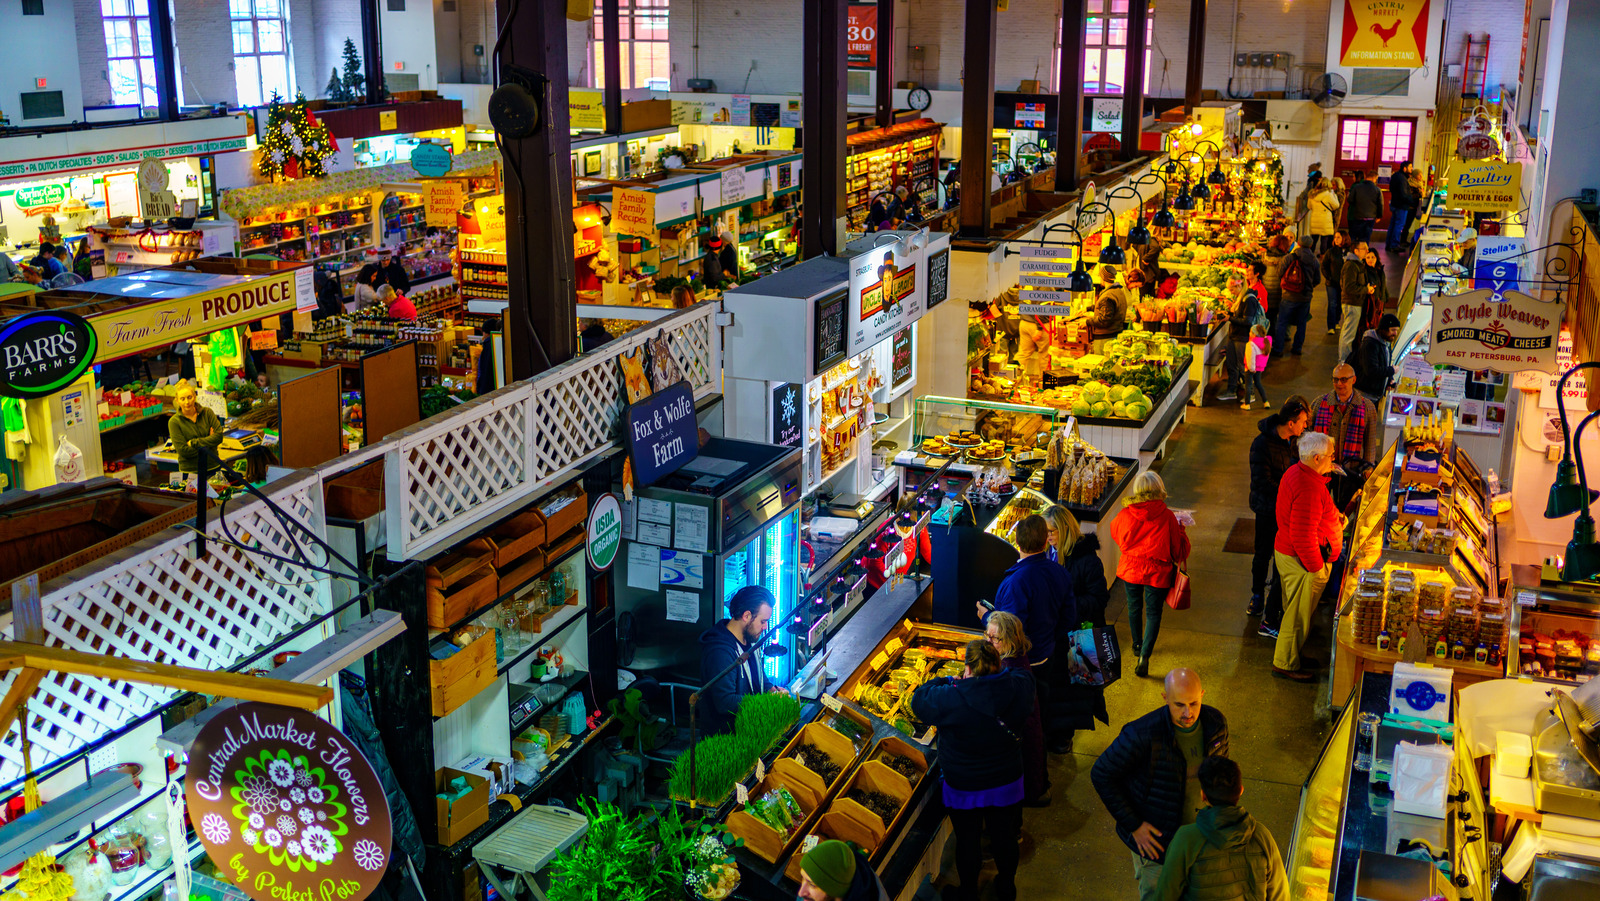 America's oldest farmers' market dates back to the 18th century